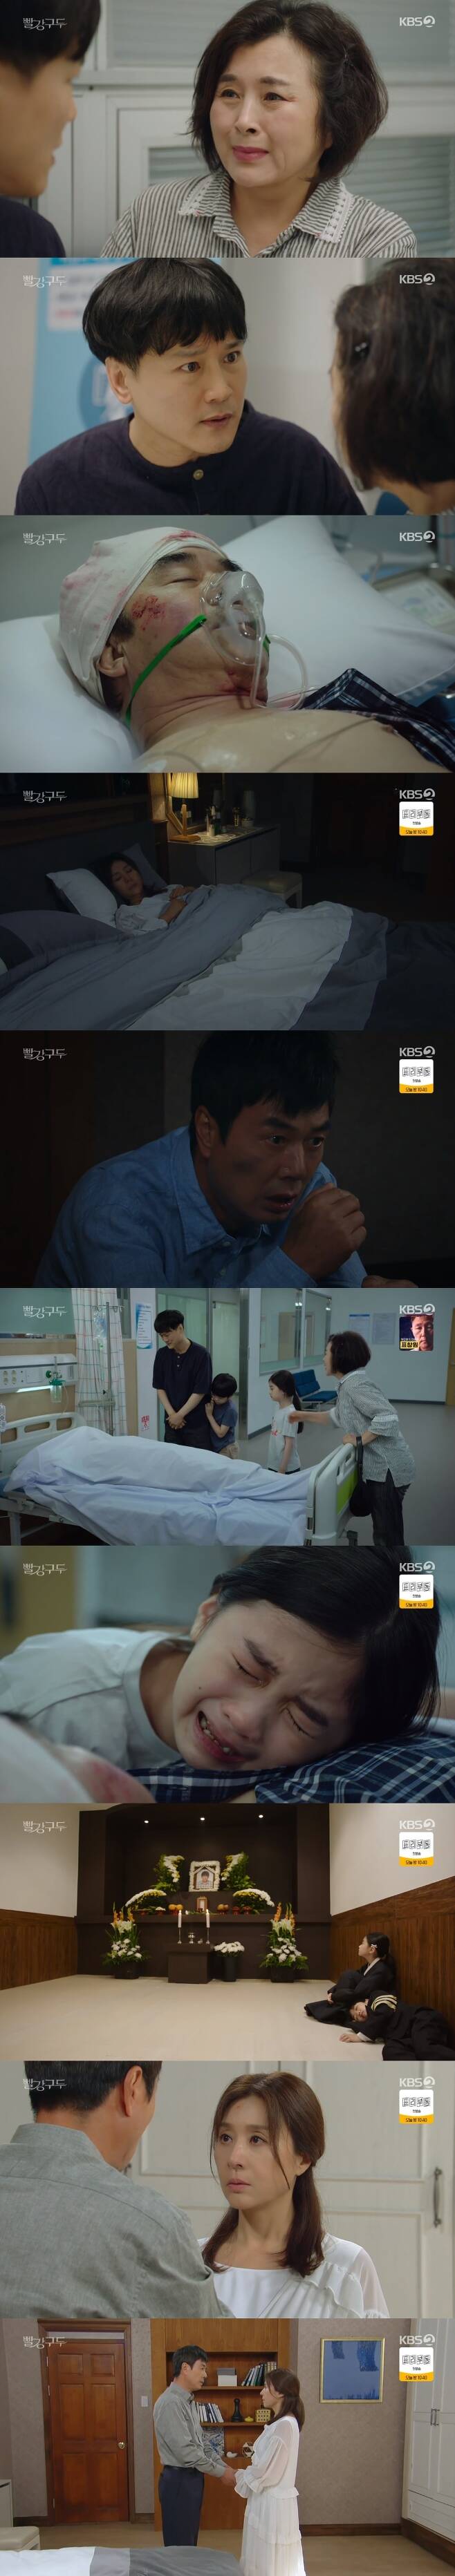 Seoul = = Red Guddu Kim Gyu-cheol finally died.On KBS 2TVs daily drama Red Guddu, which aired on the afternoon of the 7th, Kang Min-hee (Choi Myeong-Gil) husband Kim Jung-guk (Kim Gyu-cheol) was hit and run by kwon hyeok-sang (Sunwoo Jae-duk) and died.Earlier, kwon hyeok-sang hit Kim Jung-guk while carrying Sir Kang Min-hee in his car. They ran away.So Ok-kyung (Kyung In-sun), So Tae-gil (Kim Kwang-young), Brother and Sister who witnessed the scene knew all the facts but closed their mouths.So Ok-kyung tried to tell the police the truth, but So Tae-gil blocked it. Shister your mouth, he said, persuading him to let him undergo surgery for sick Gun-wook (Ji Sang-yoon).He showed the Sister the identification of kwon hyeok-sang, which he learned at the scene of a traffic accident.The hit-and-run said kwon hyok-sang is certain and said he would save his sister son.Kwon hyeok-sang quietly covered the case; Kim Jung-guk, who was treated without consciousness, eventually died.Young Kim Jin-a woke up with his brother, but no parents were there, when So Ok-kyung found Brother and Sister and said, Mom will be here soon.If youre sleeping, youll come, he said.Sir Kang Min-hee, who was shocked by a car accident, was stabilized at the kwon hyeok-sang house.Kwon hyeok-sang, who returned after recovering from the accident vehicle, was troubled by wrapping his head, but he said, I have to forget, nothing happened.Young Kim Jin-a soon after found out about Fathers death; Kim Jin-a, who last saw Fathers face in hospital, quietly blushed.He grabbed Fathers hand and said, Father wake up, hes not dead, is he? Father wake up.Only young Brother and Sister kept Mortuary; no mother, Lord Kang Min-hee, appeared.After a late wake-up call at a kwon hyok-sang home, he started worrying about the children, saying, I have to go home. But kwon hyok-sang said, No.Now this is your house, he said. The children are going to do everything I want now. I will do anything if I stay with me.Sir Kang Min-hee thought to himself, You killed my husband, kwon hyok-sang you are a murderer.Kwon hyeok-sang said, You have to be next to me, I have to keep my secret from my side to the end.Meanwhile, Red Guddu is a drama about a heartless mother (Choi Myeong-Gil) who left for love and Blow-Up while ignoring the affection of her blood for her success, and her daughter (Soi Hyun) who fell into the bridle of Blow-Up, who cannot be stopped with vengeance against her.